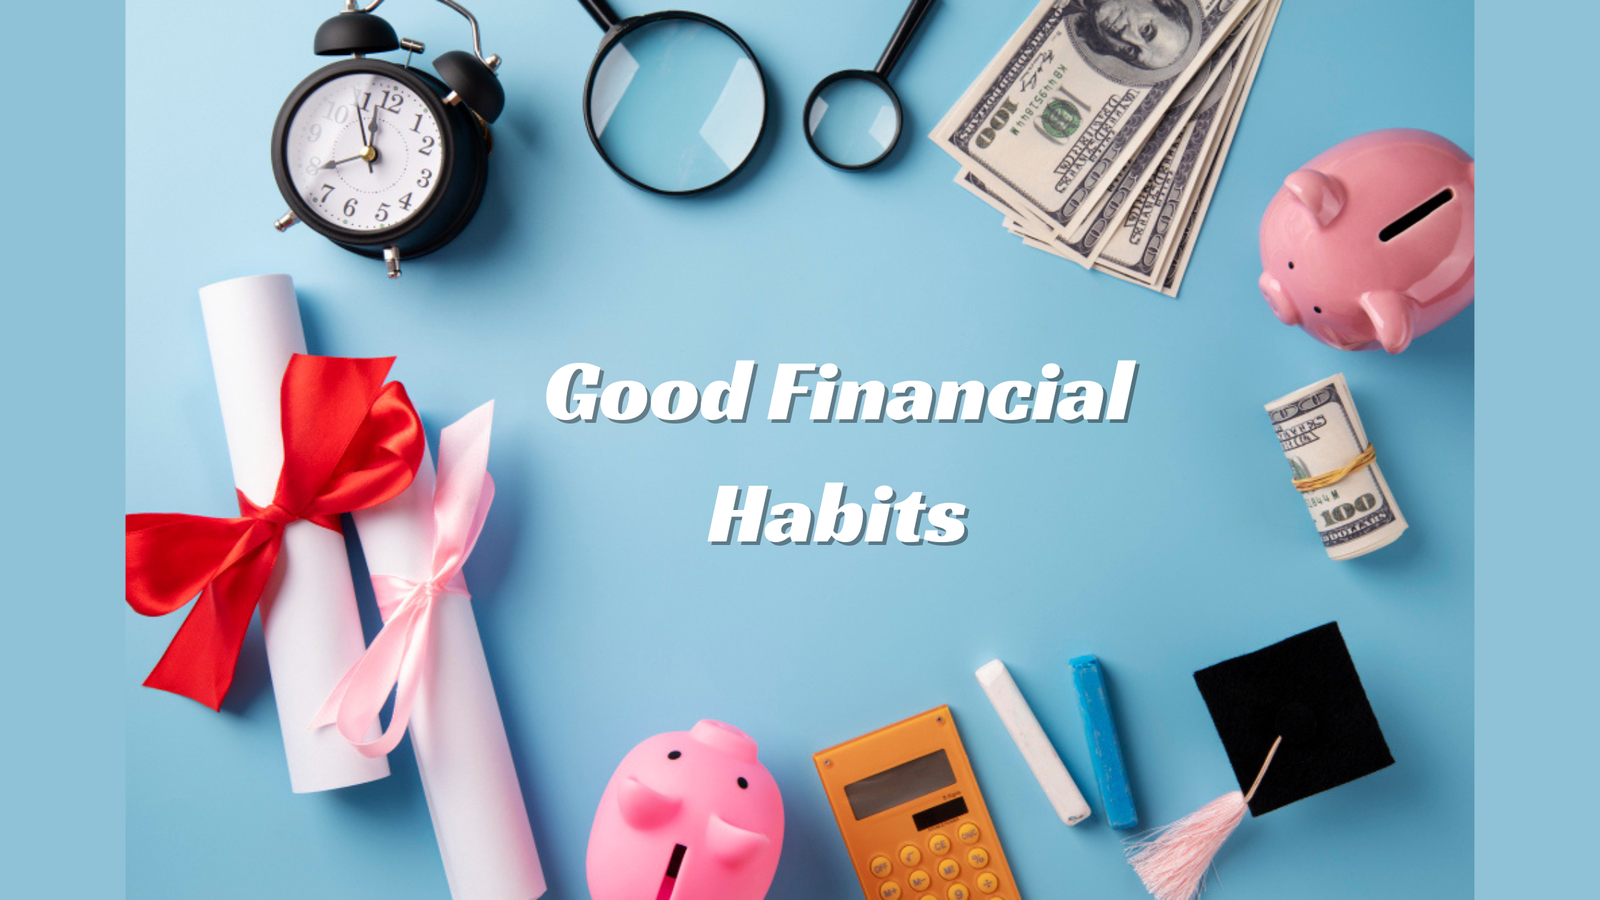 3 Good Financial Habits to Be Aware Of